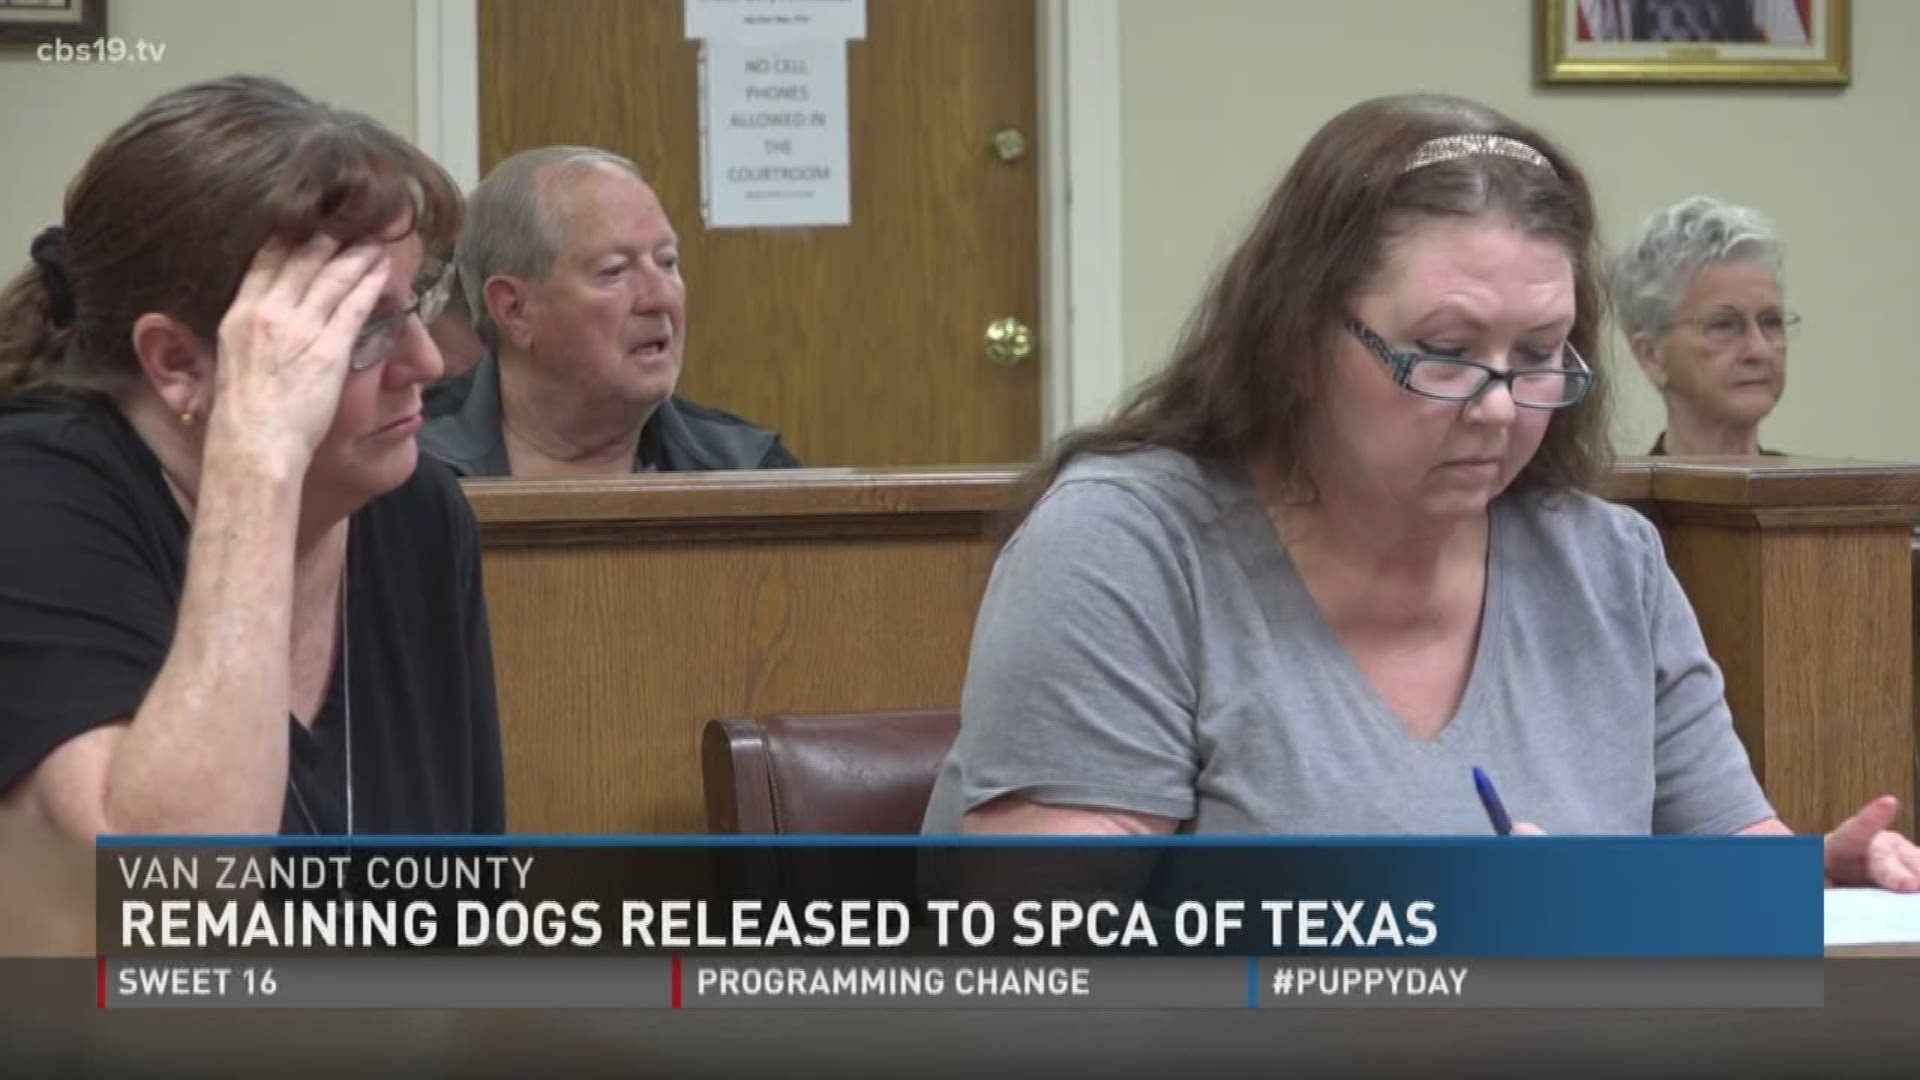 SPCA of Texas receive custody of alleged puppy mill dogs.